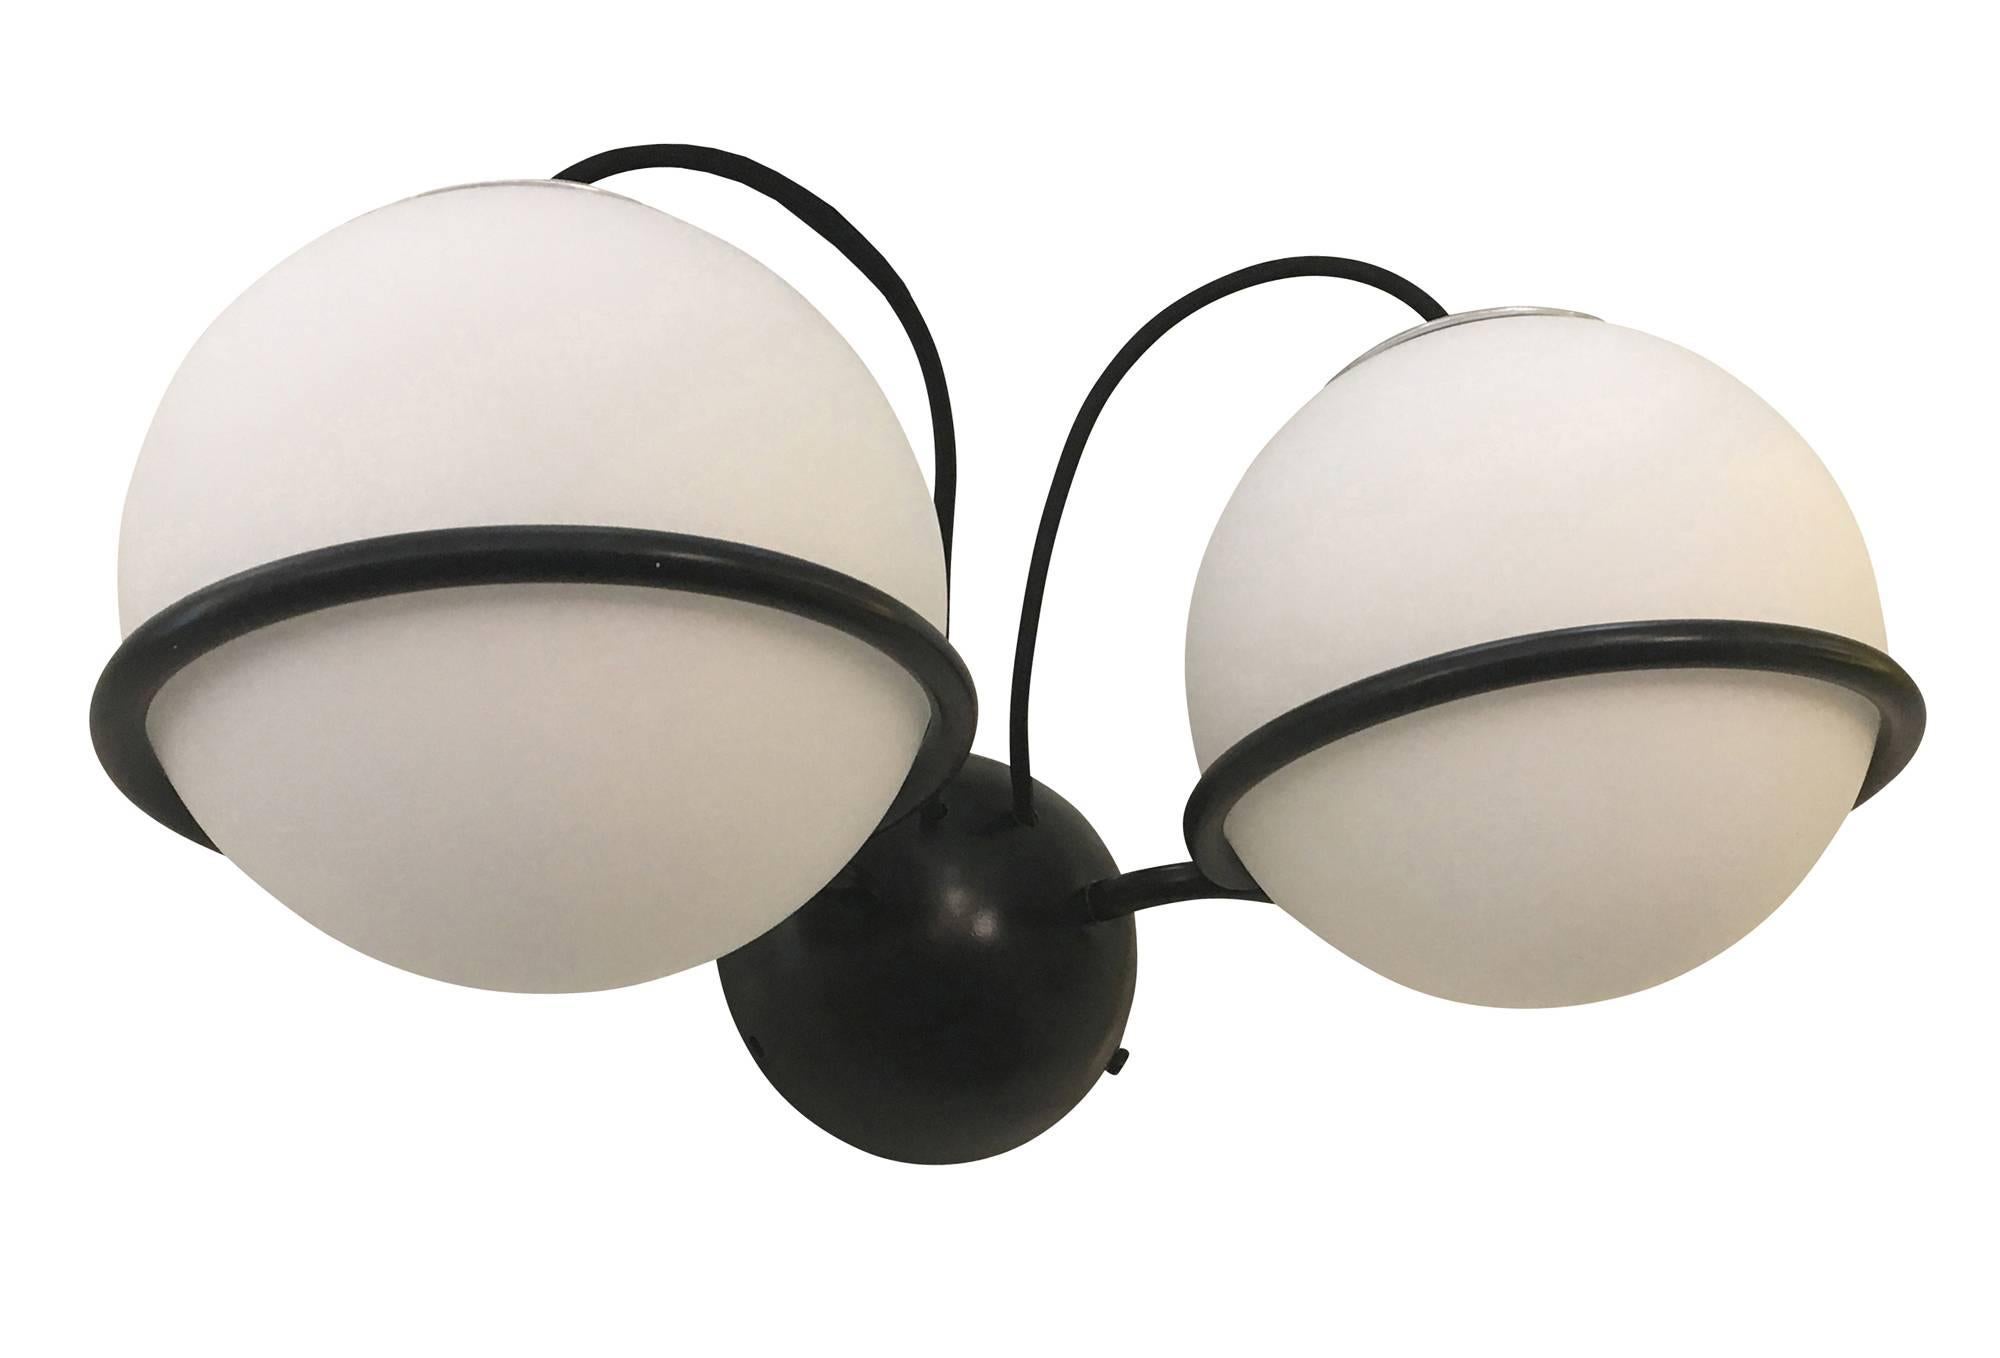 Italian  Pair of Large Sconces by Gino Sarfatti for Arteluce